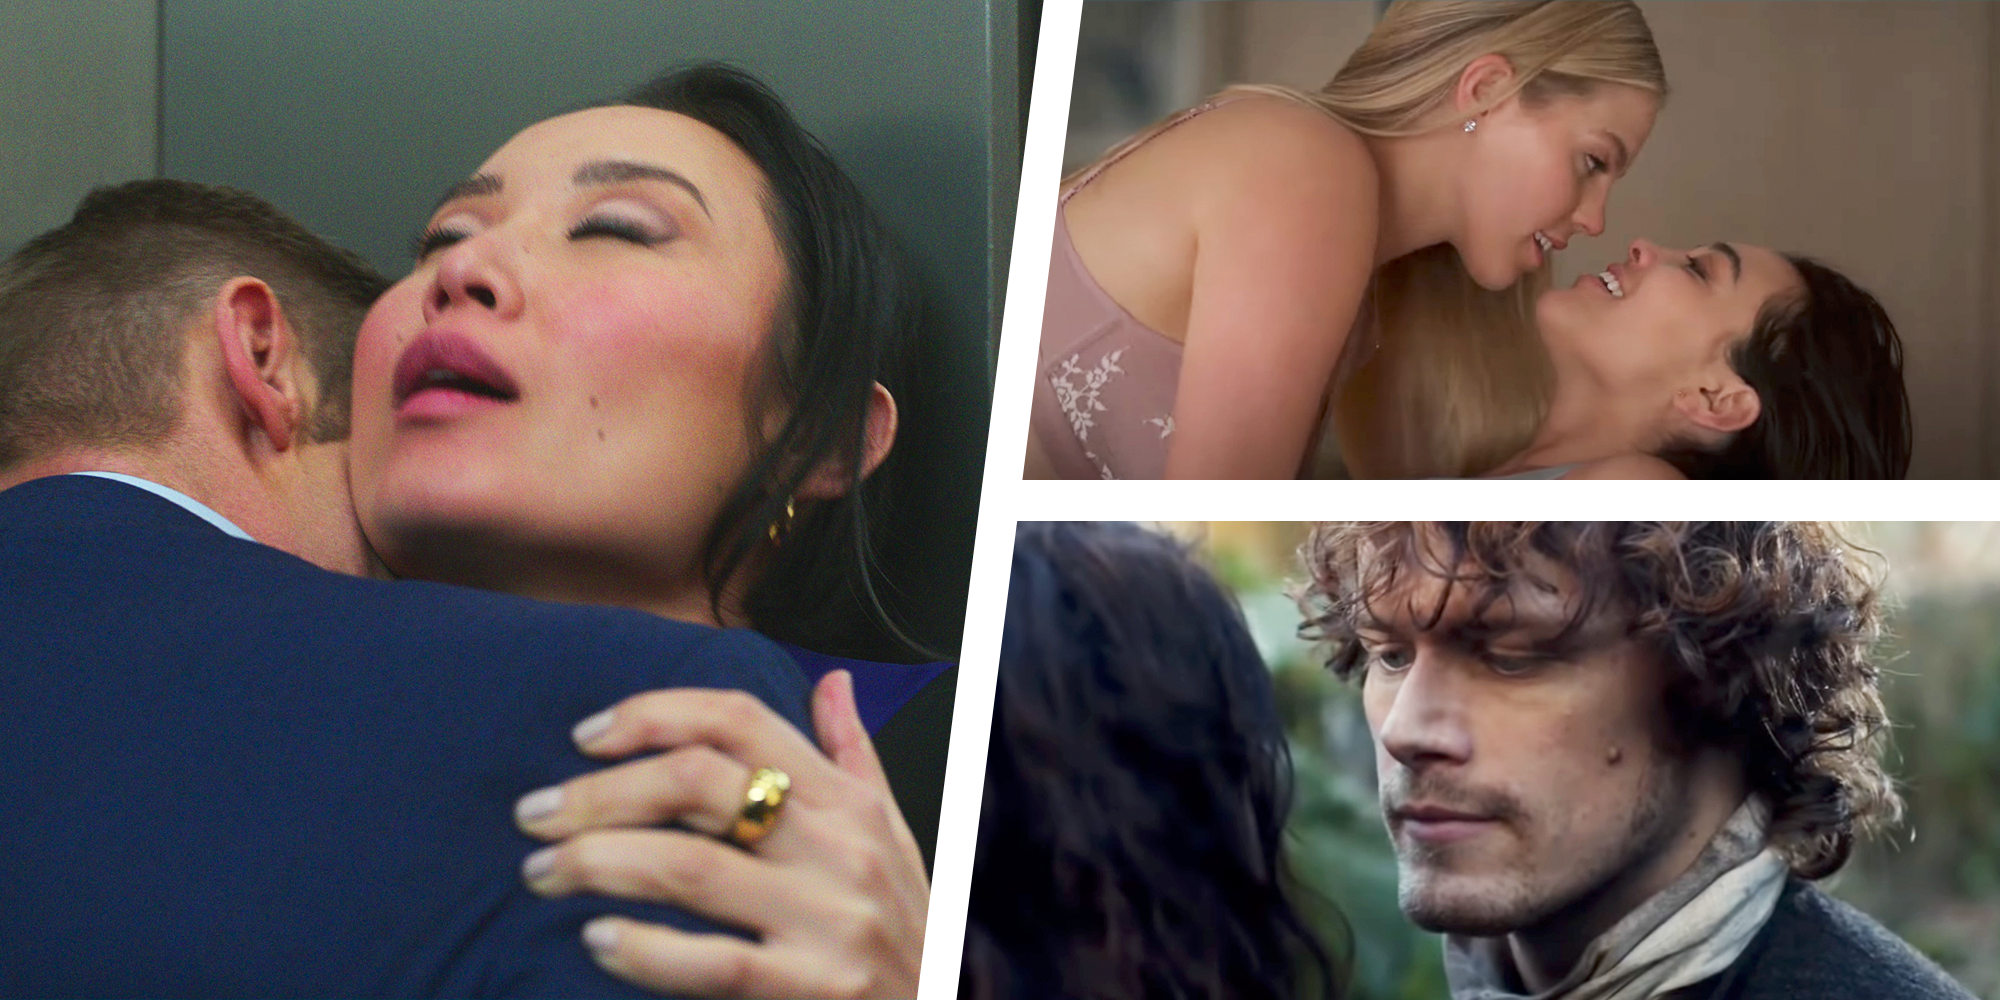 The 20 Sexiest Scenes on TV - The Best TV Sex Scenes to Watch Now